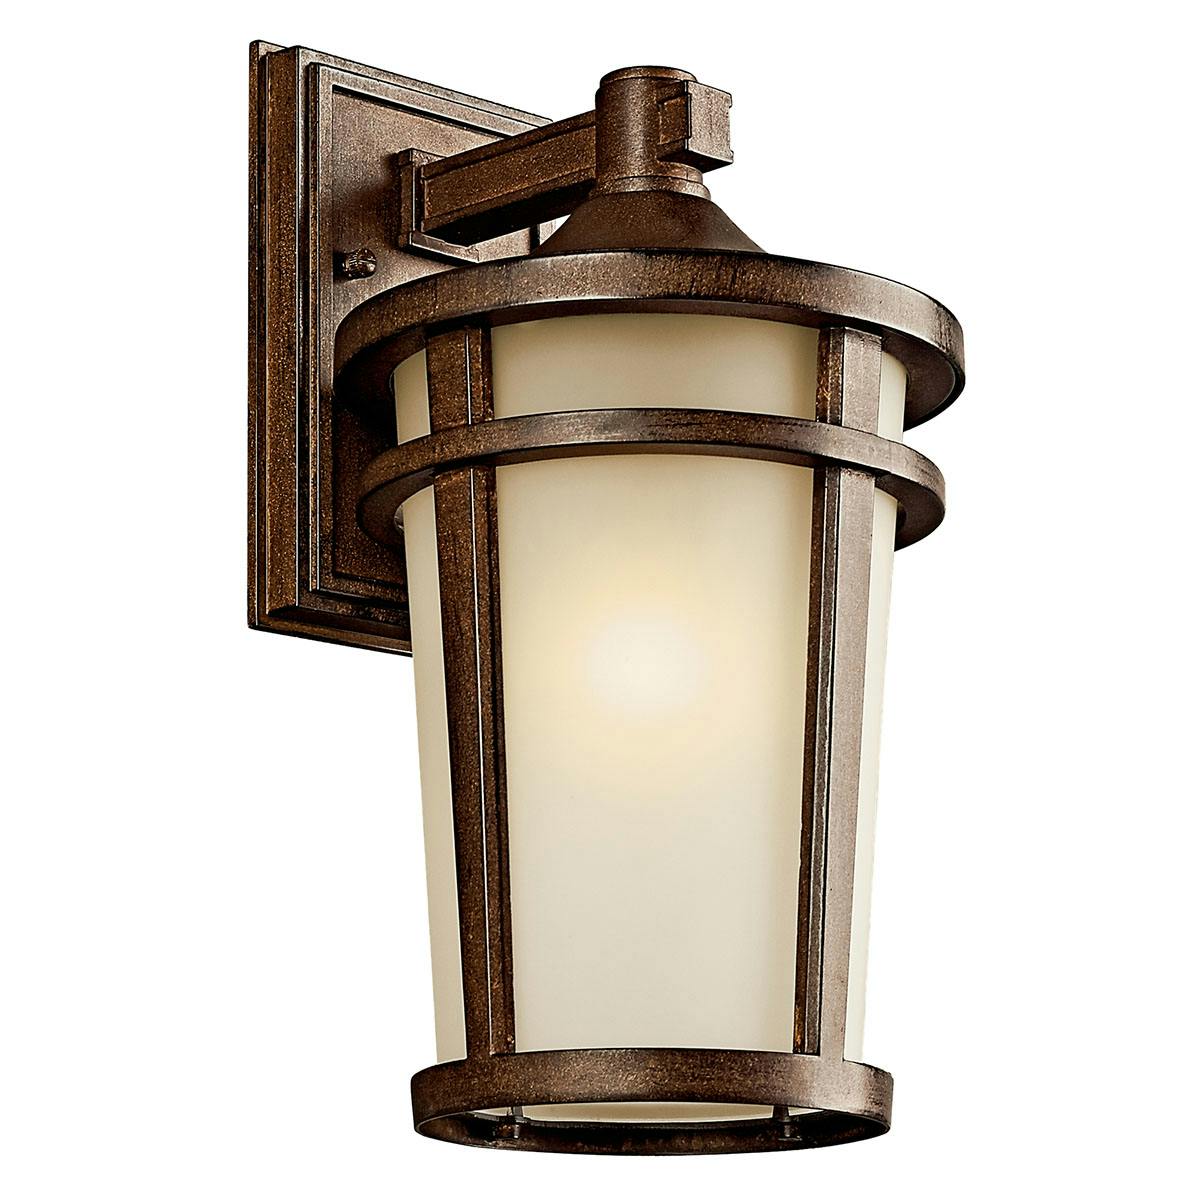 The Atwood 14.25" Wall Light Brown Stone on a white background